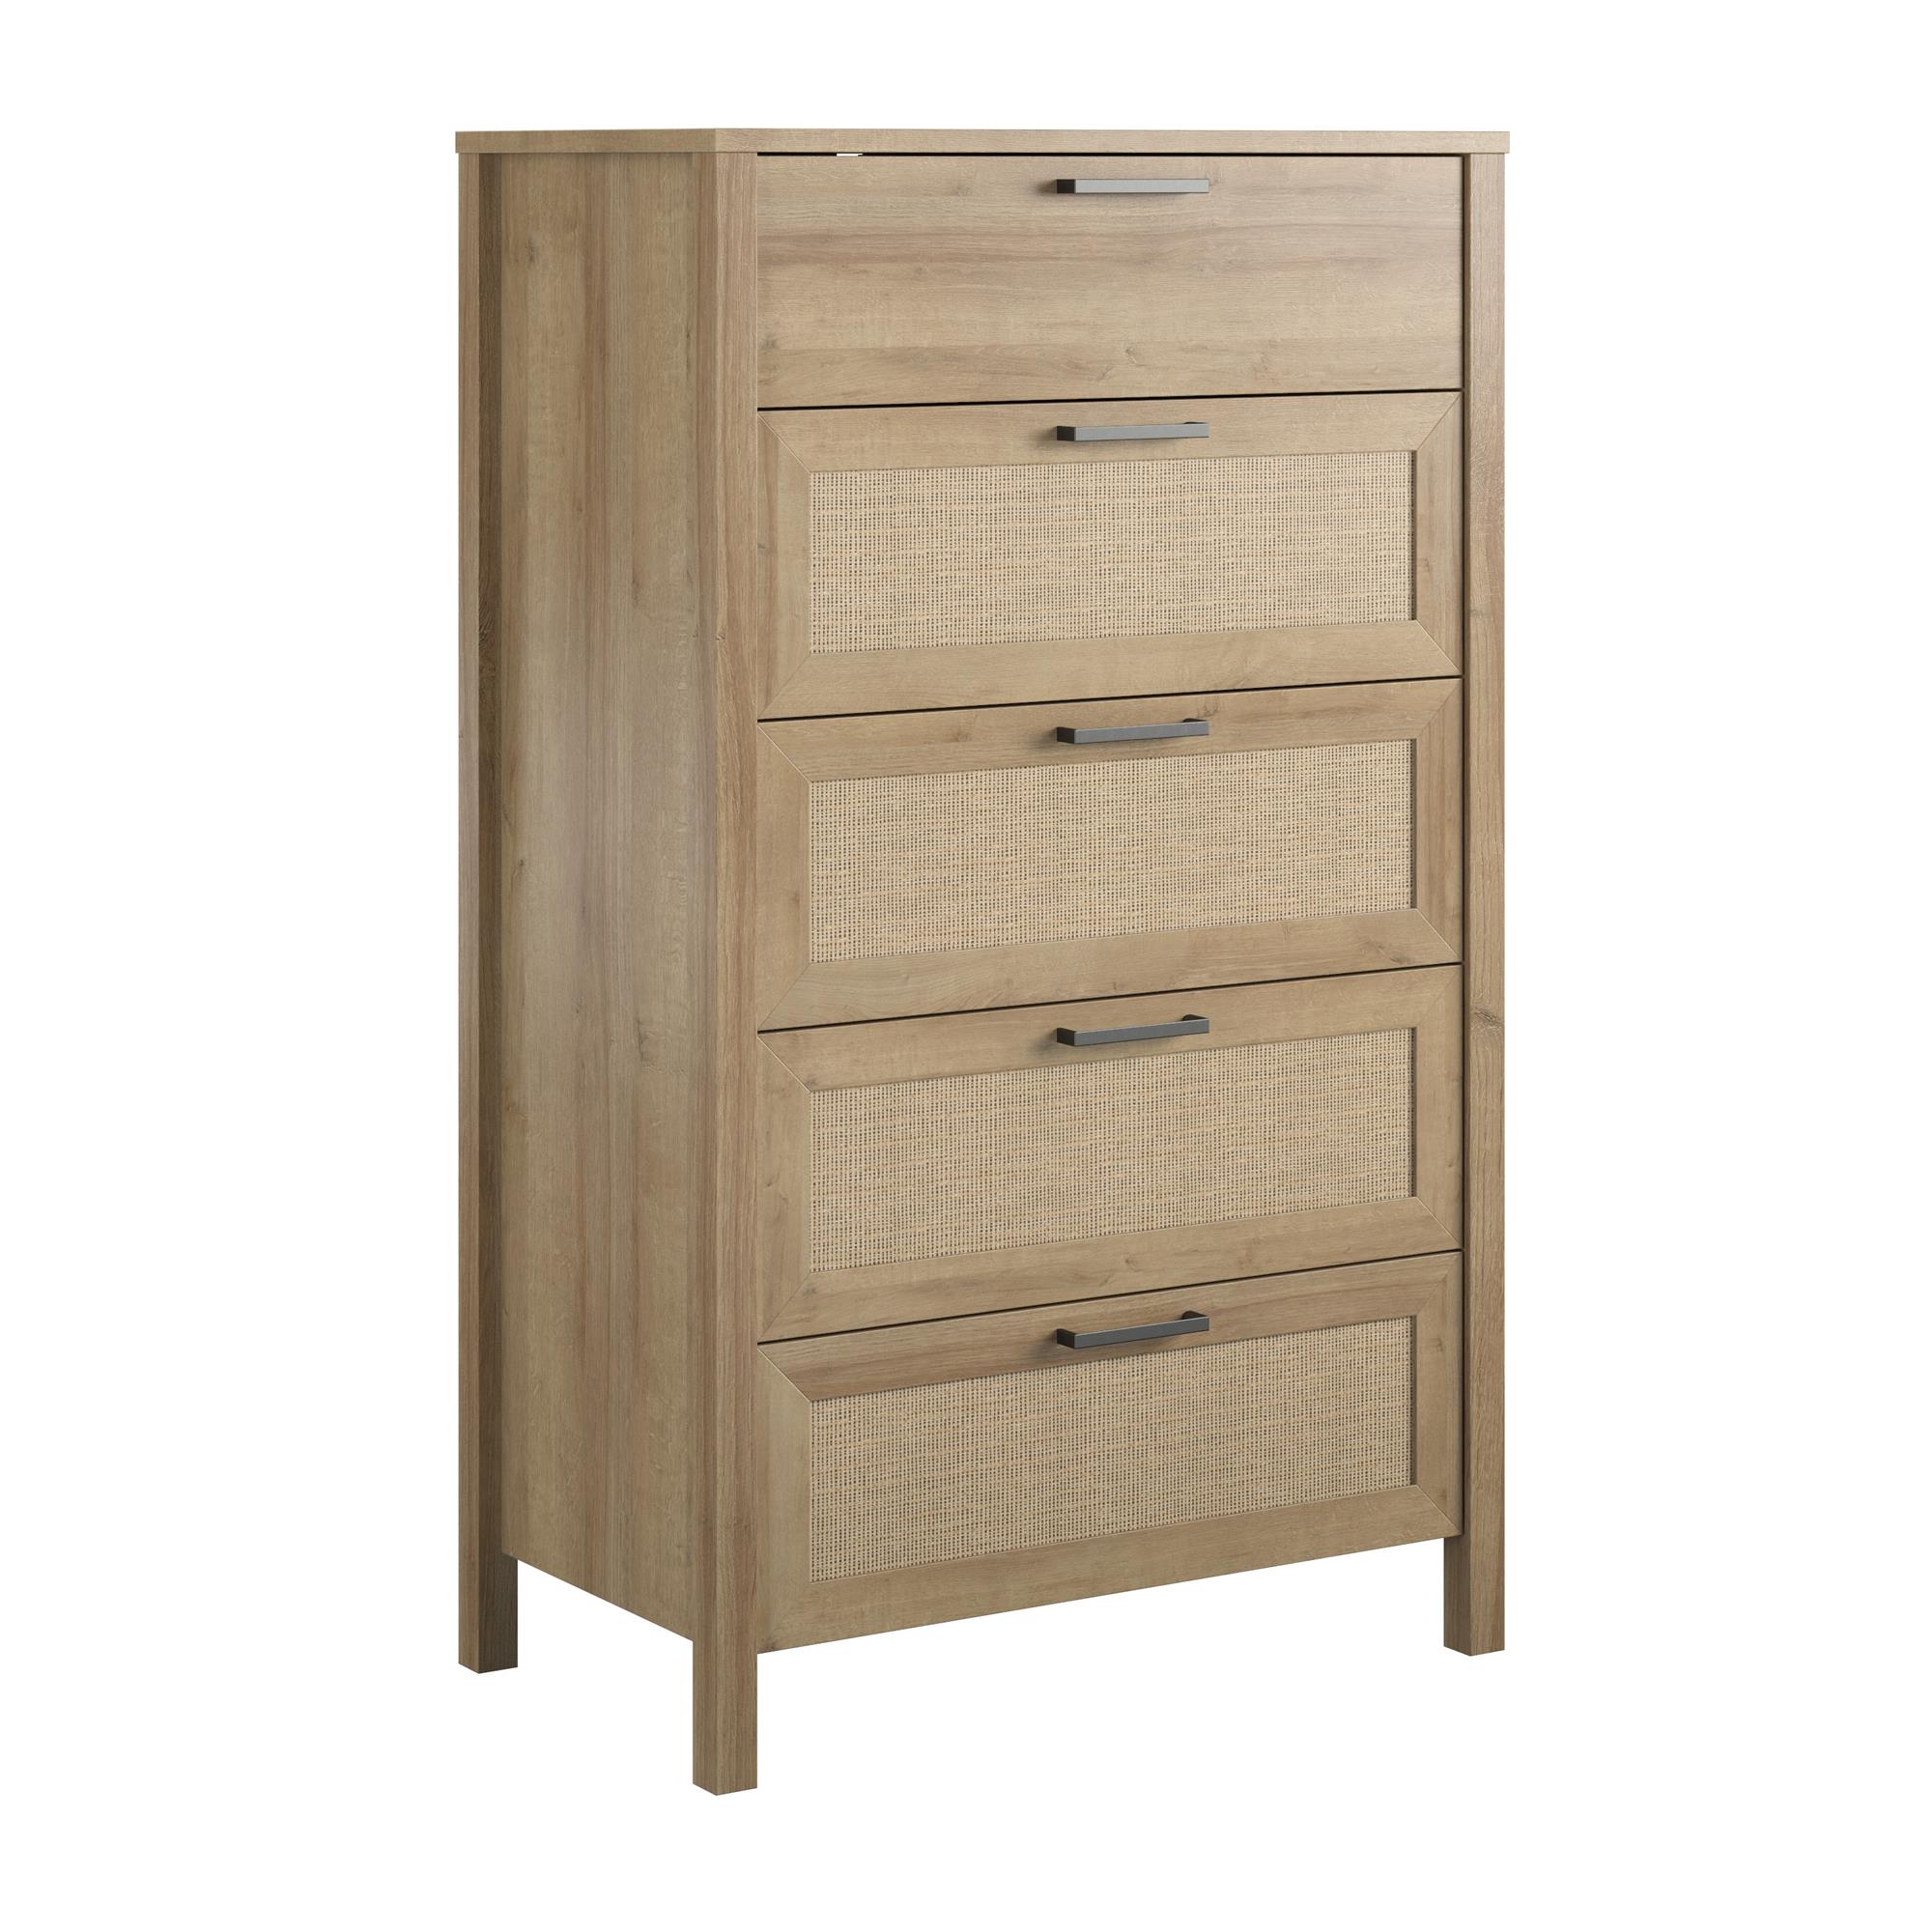 Ameriwood Home Wimberly 5-Drawer Dresser, Natural with Faux Rattan - image 4 of 12